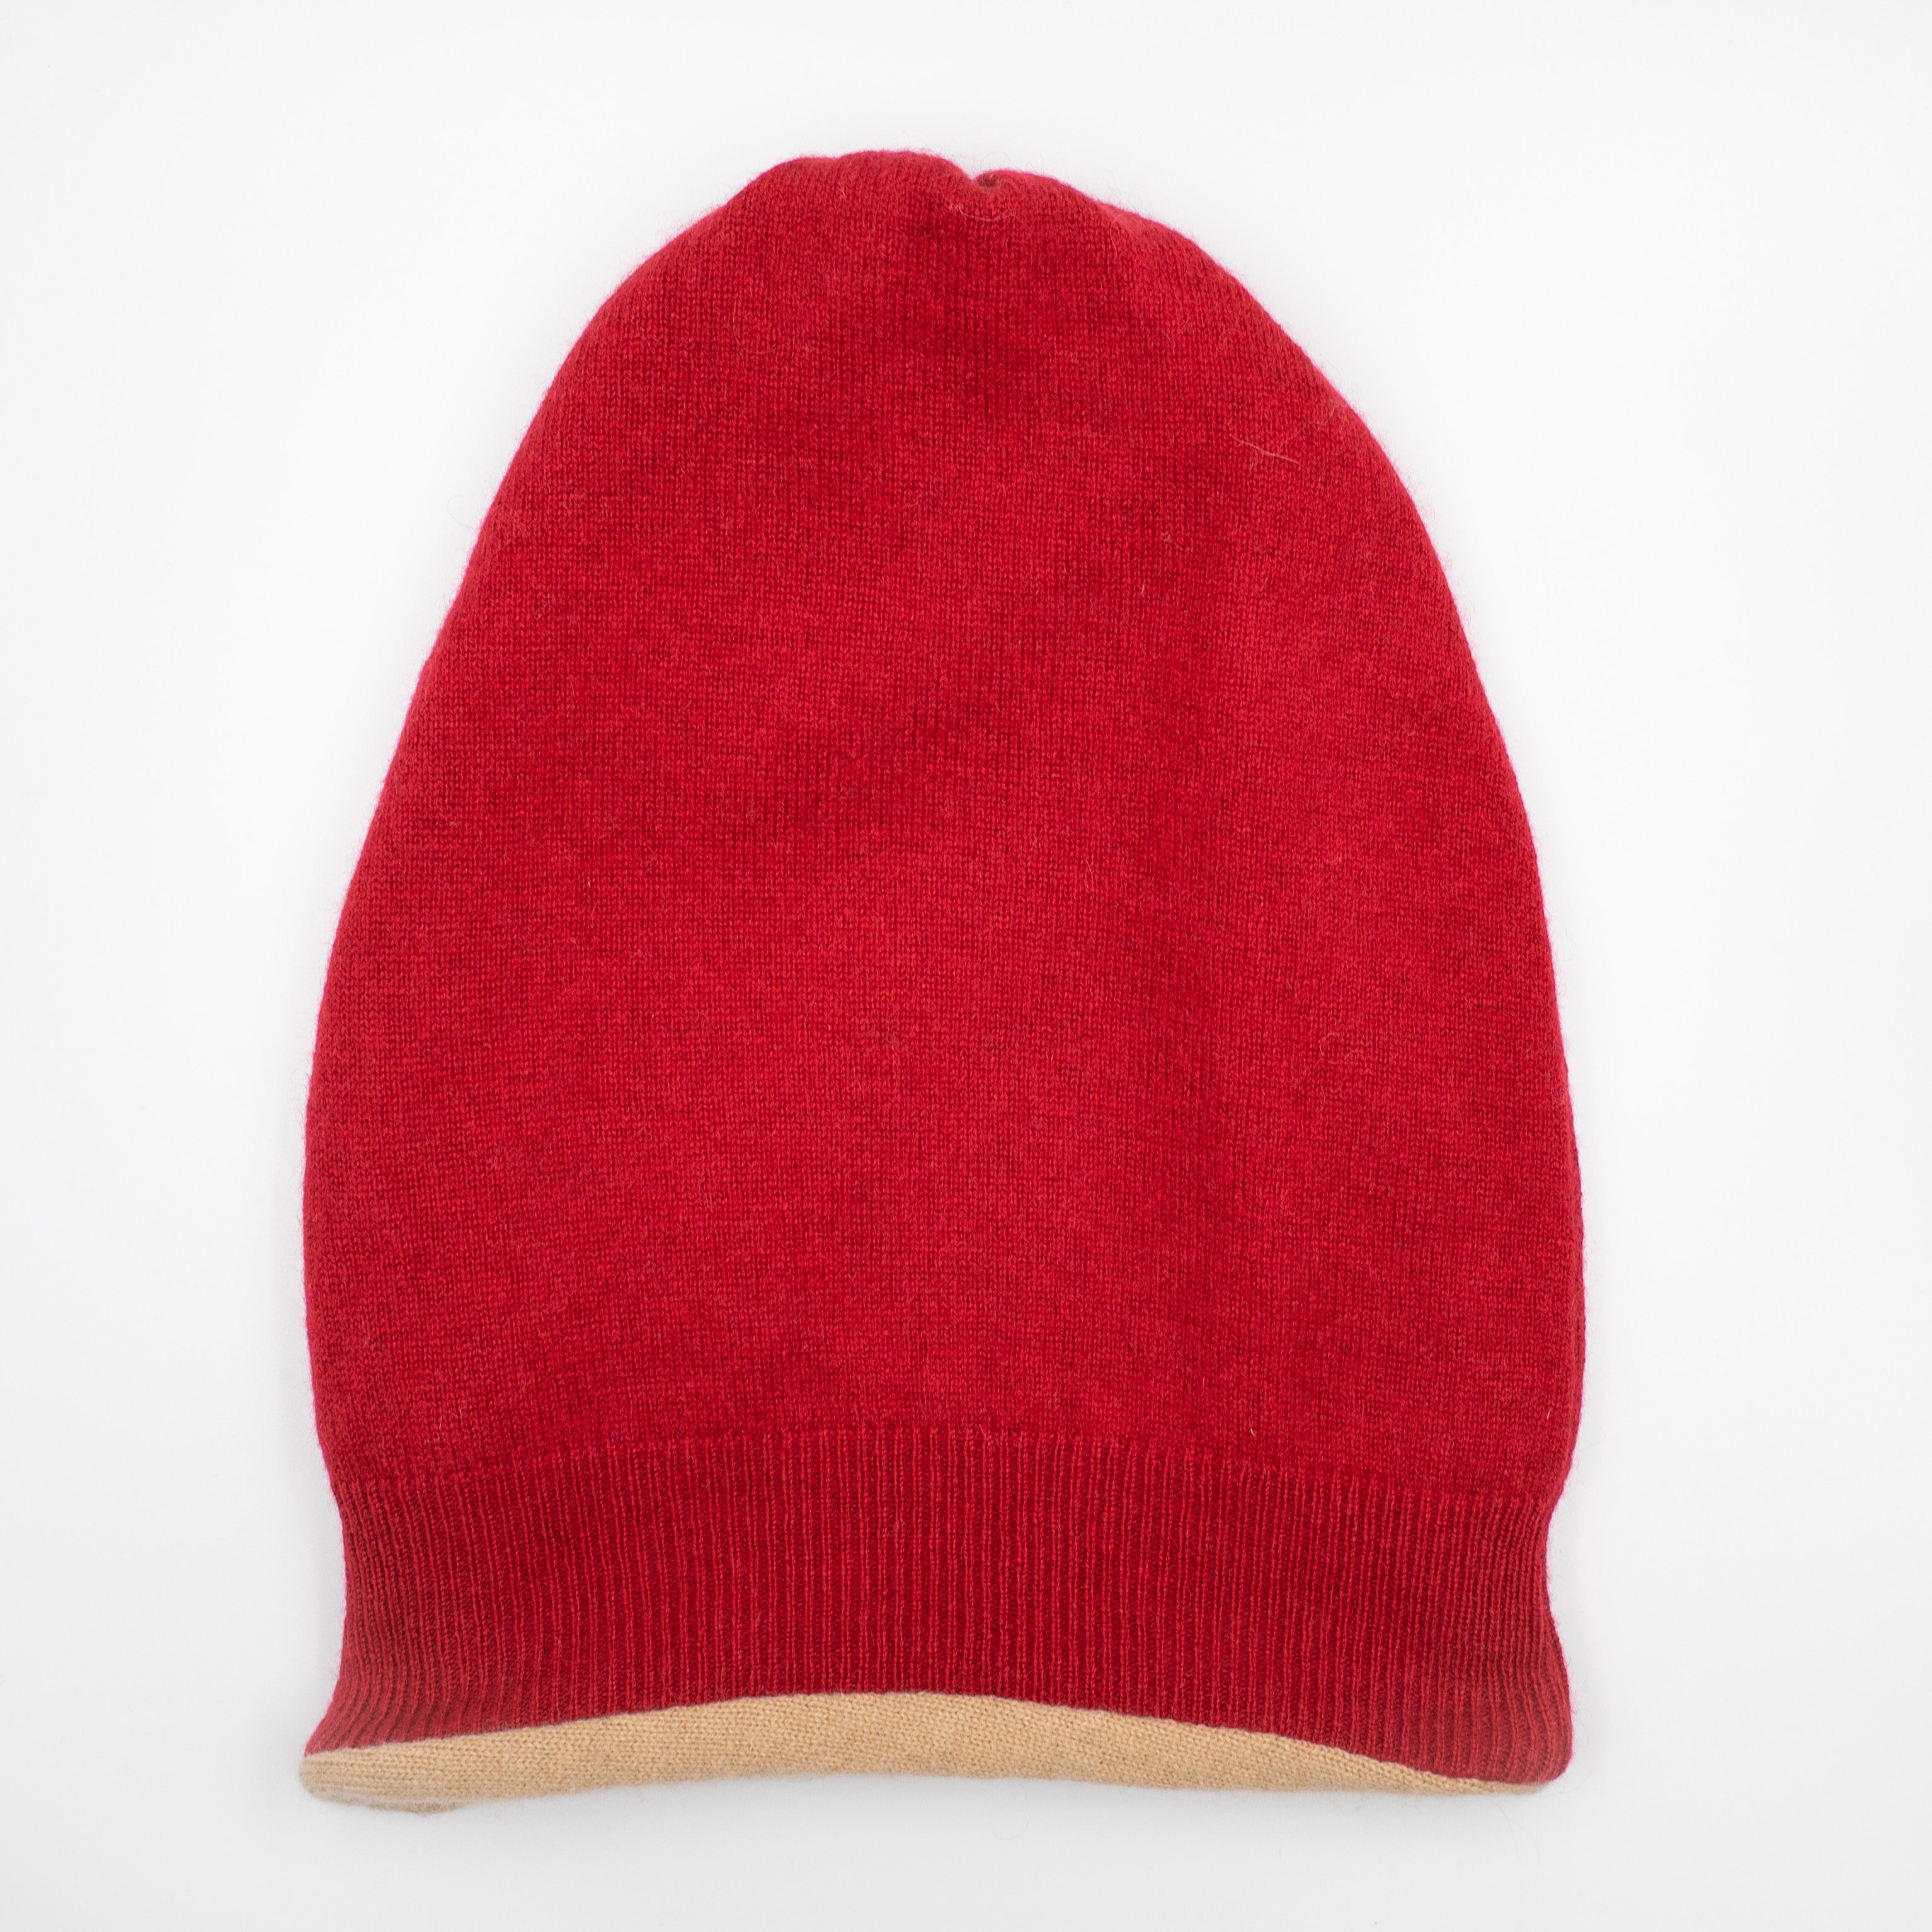 Berry Red and Caramel Reversible Slouchy Beanie Hat